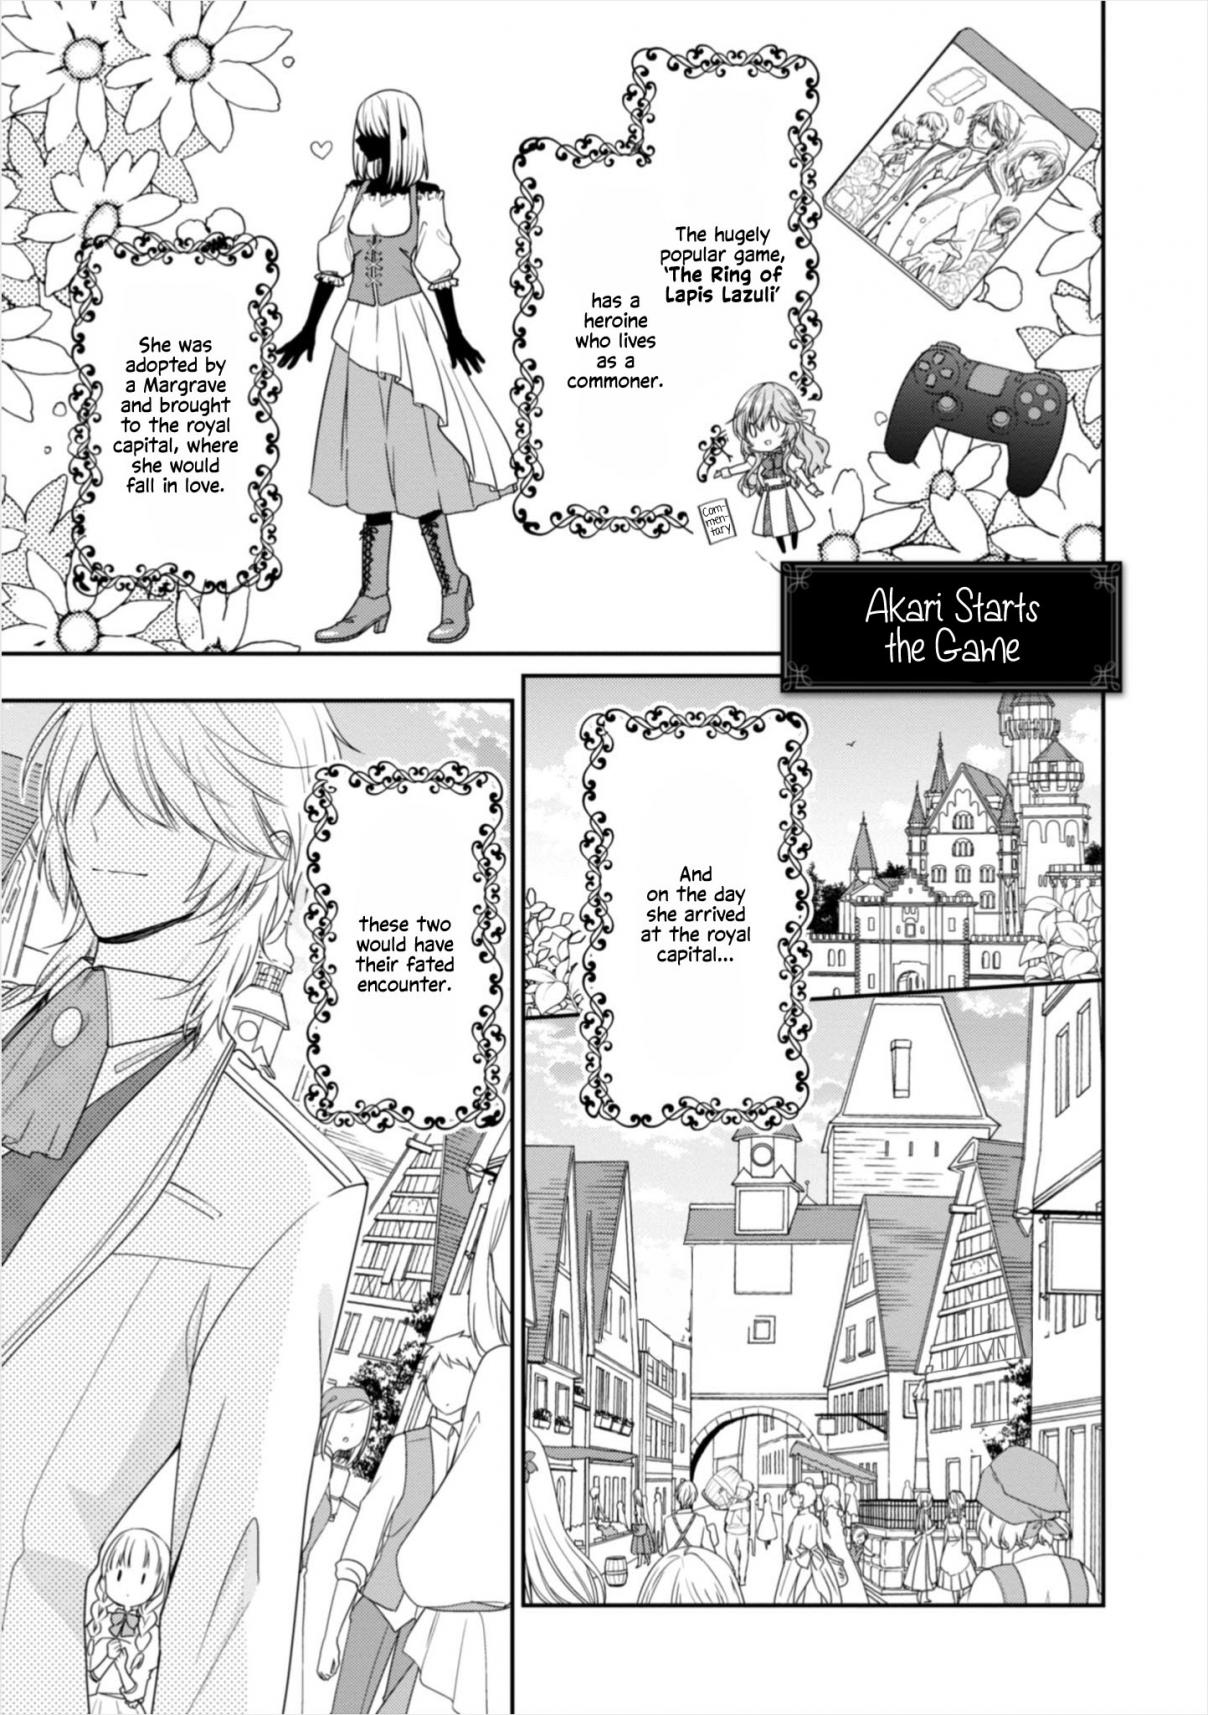 The Villainess Is Adored by the Crown Prince of the Neighboring Kingdom Vol. 2 Ch. 8.5